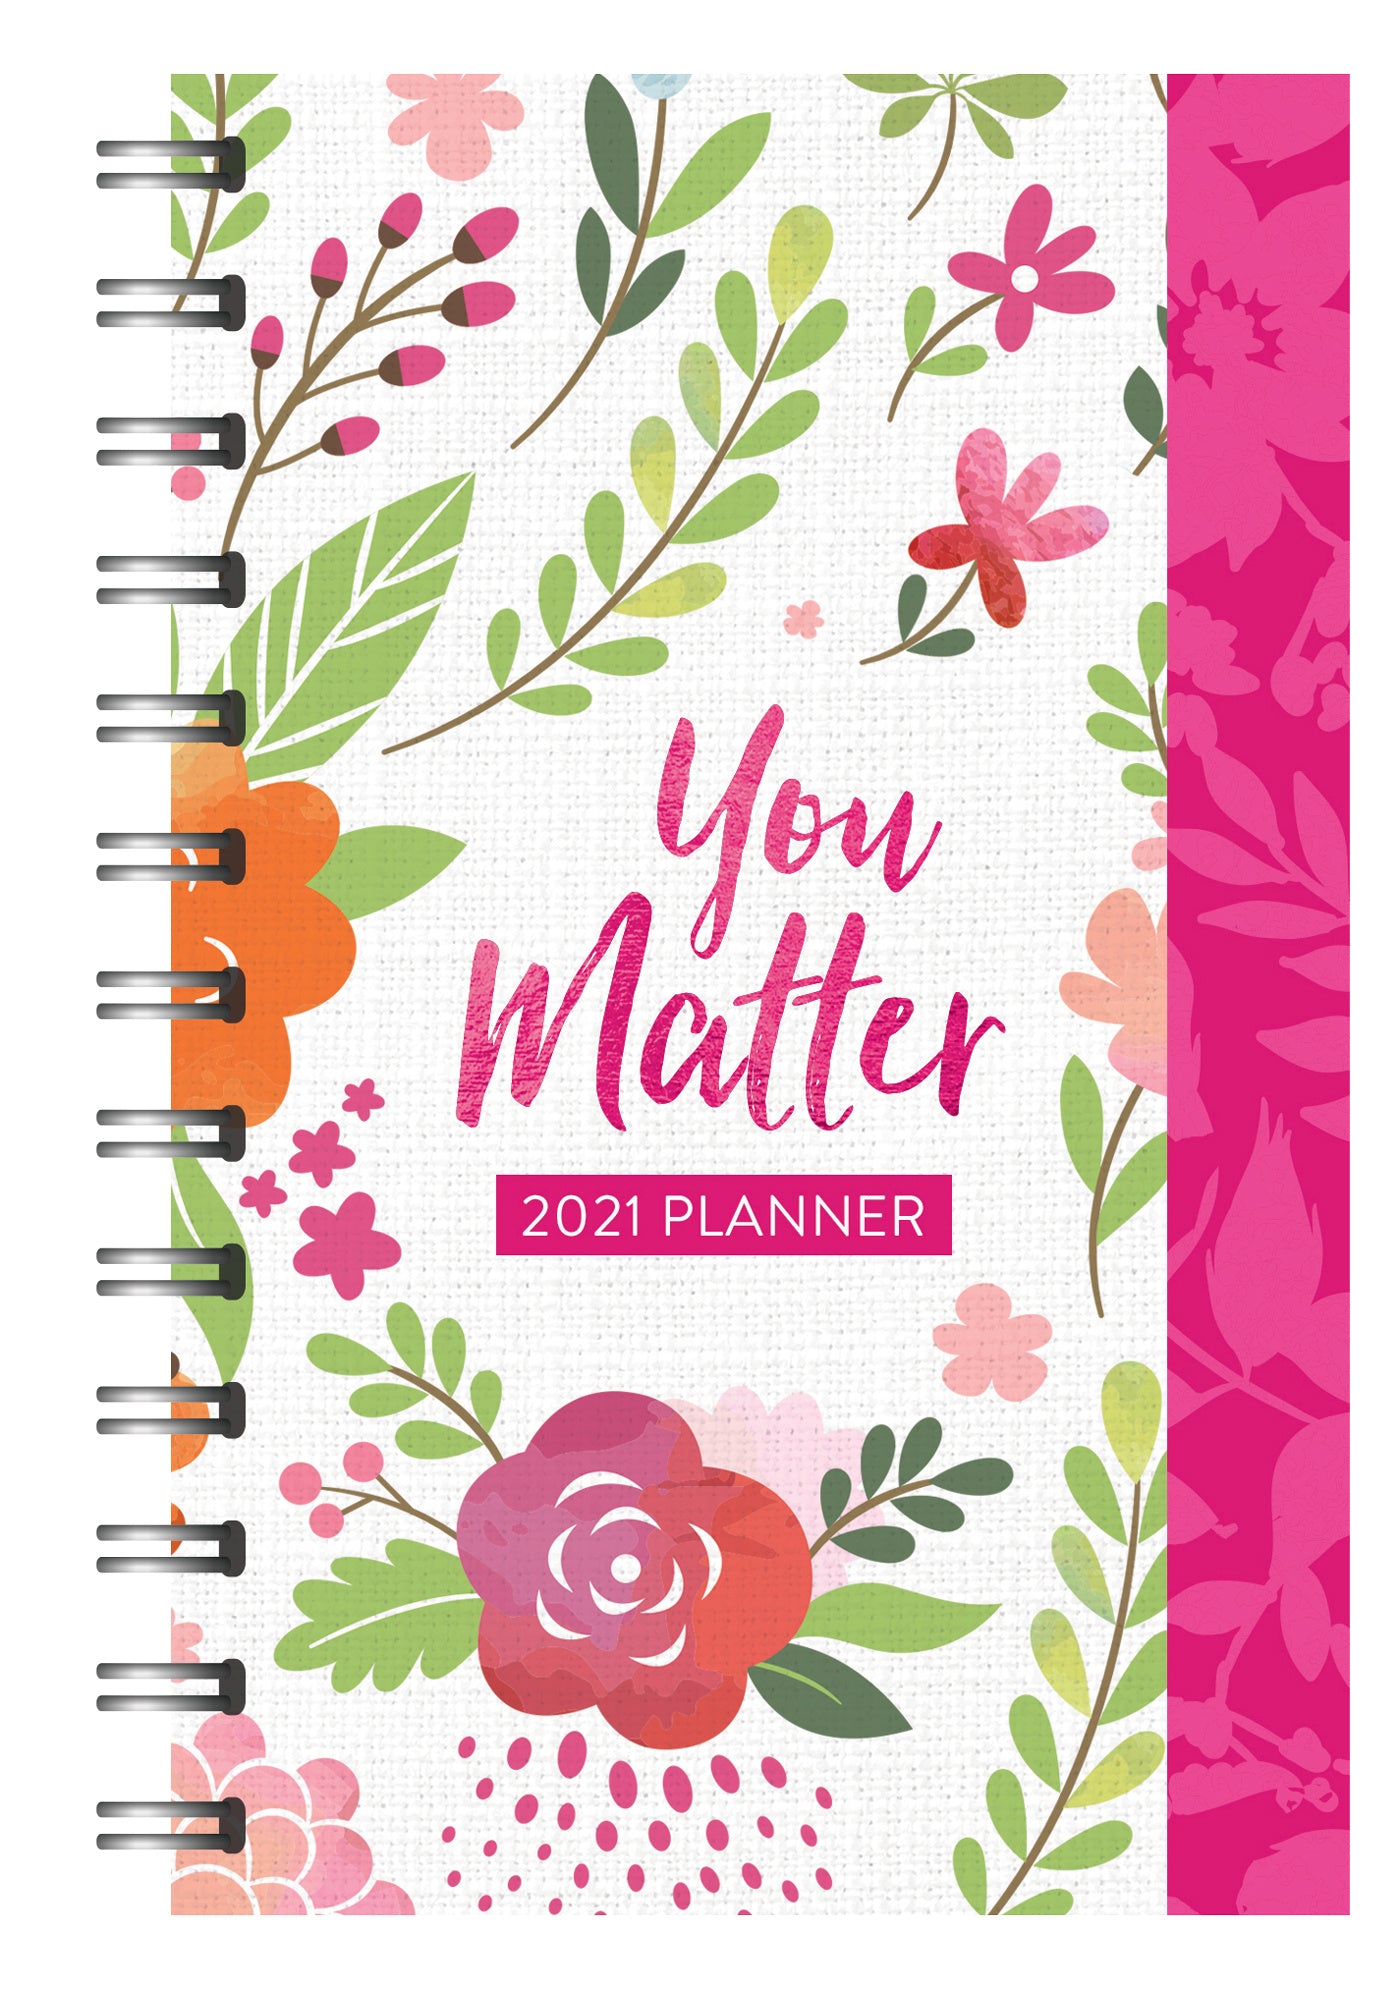 Image of 2021 Planner You Matter other